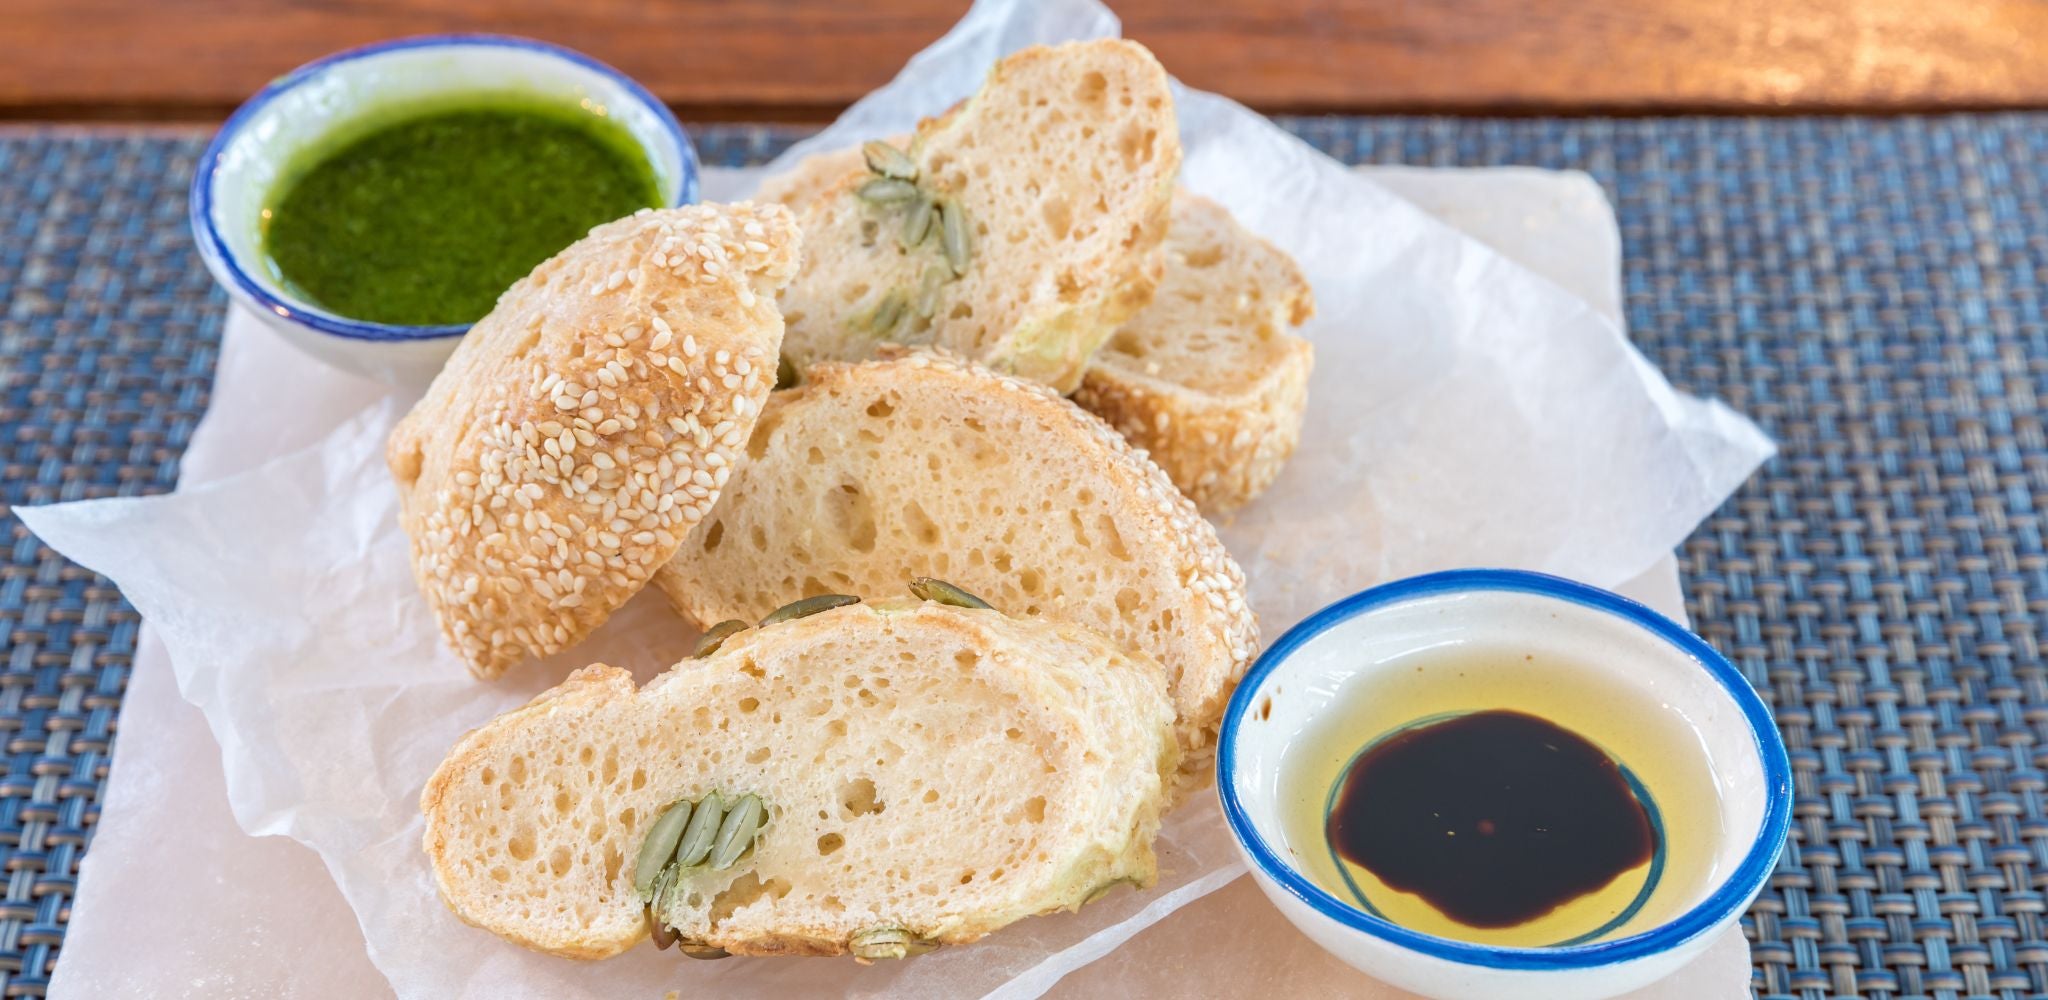 bread with pesto, and extra virgin olive oil and balsamic vinegar dip